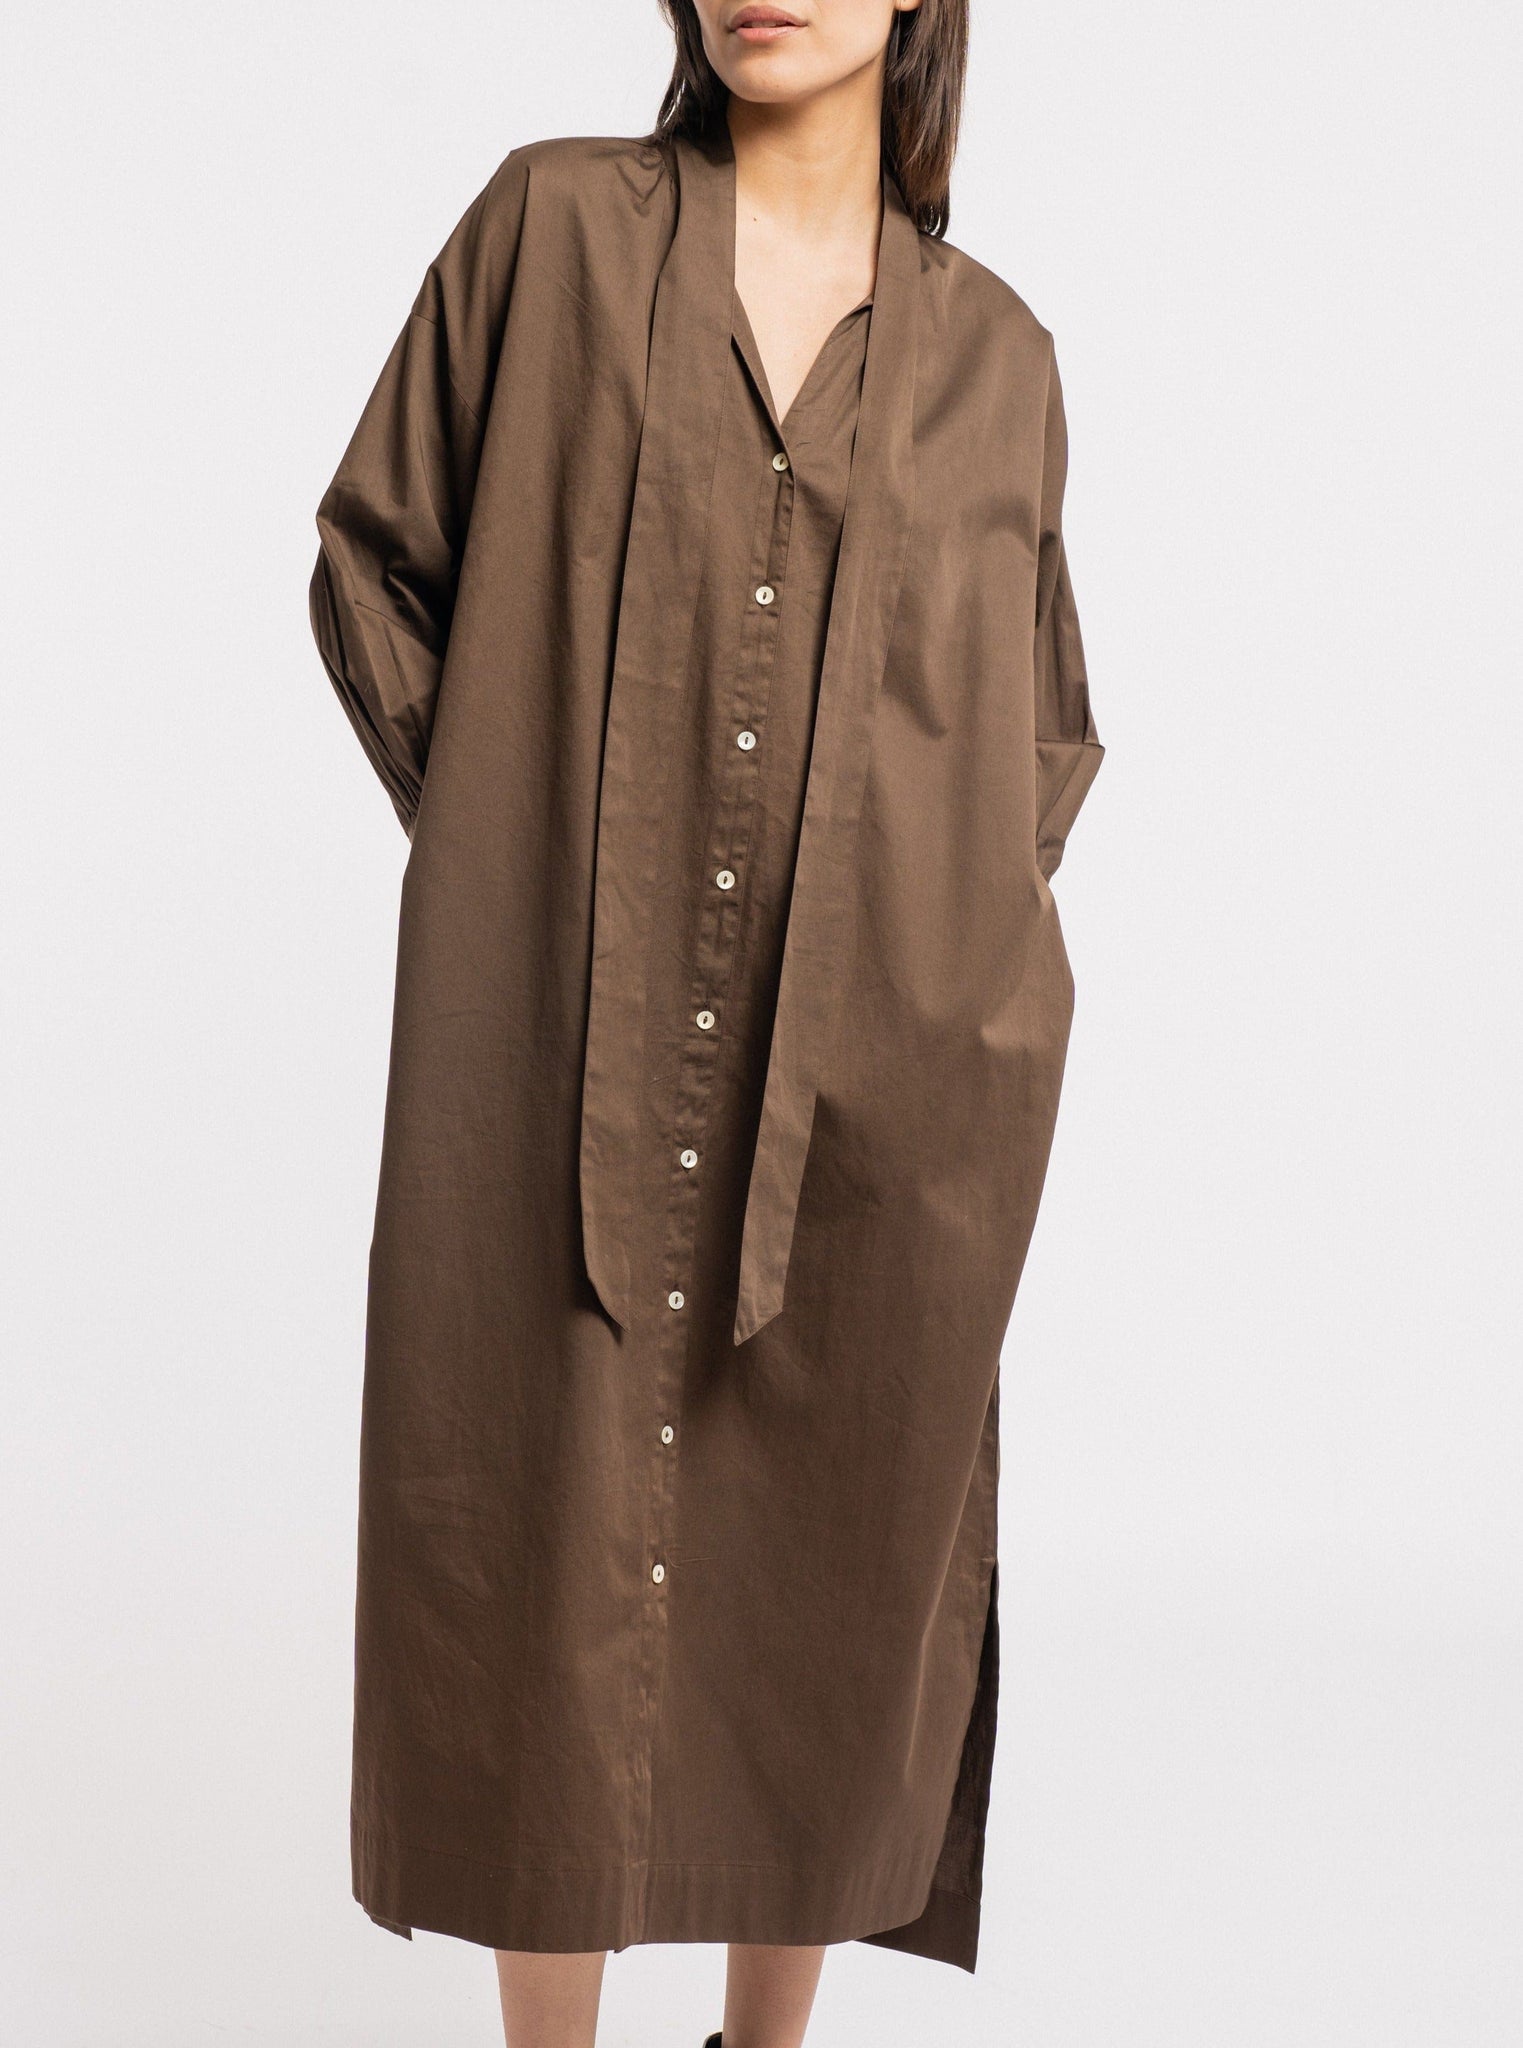 Sentence with Product Name: The model is wearing a Dolores Dress in Balsalt Brown made of organic cotton from India.